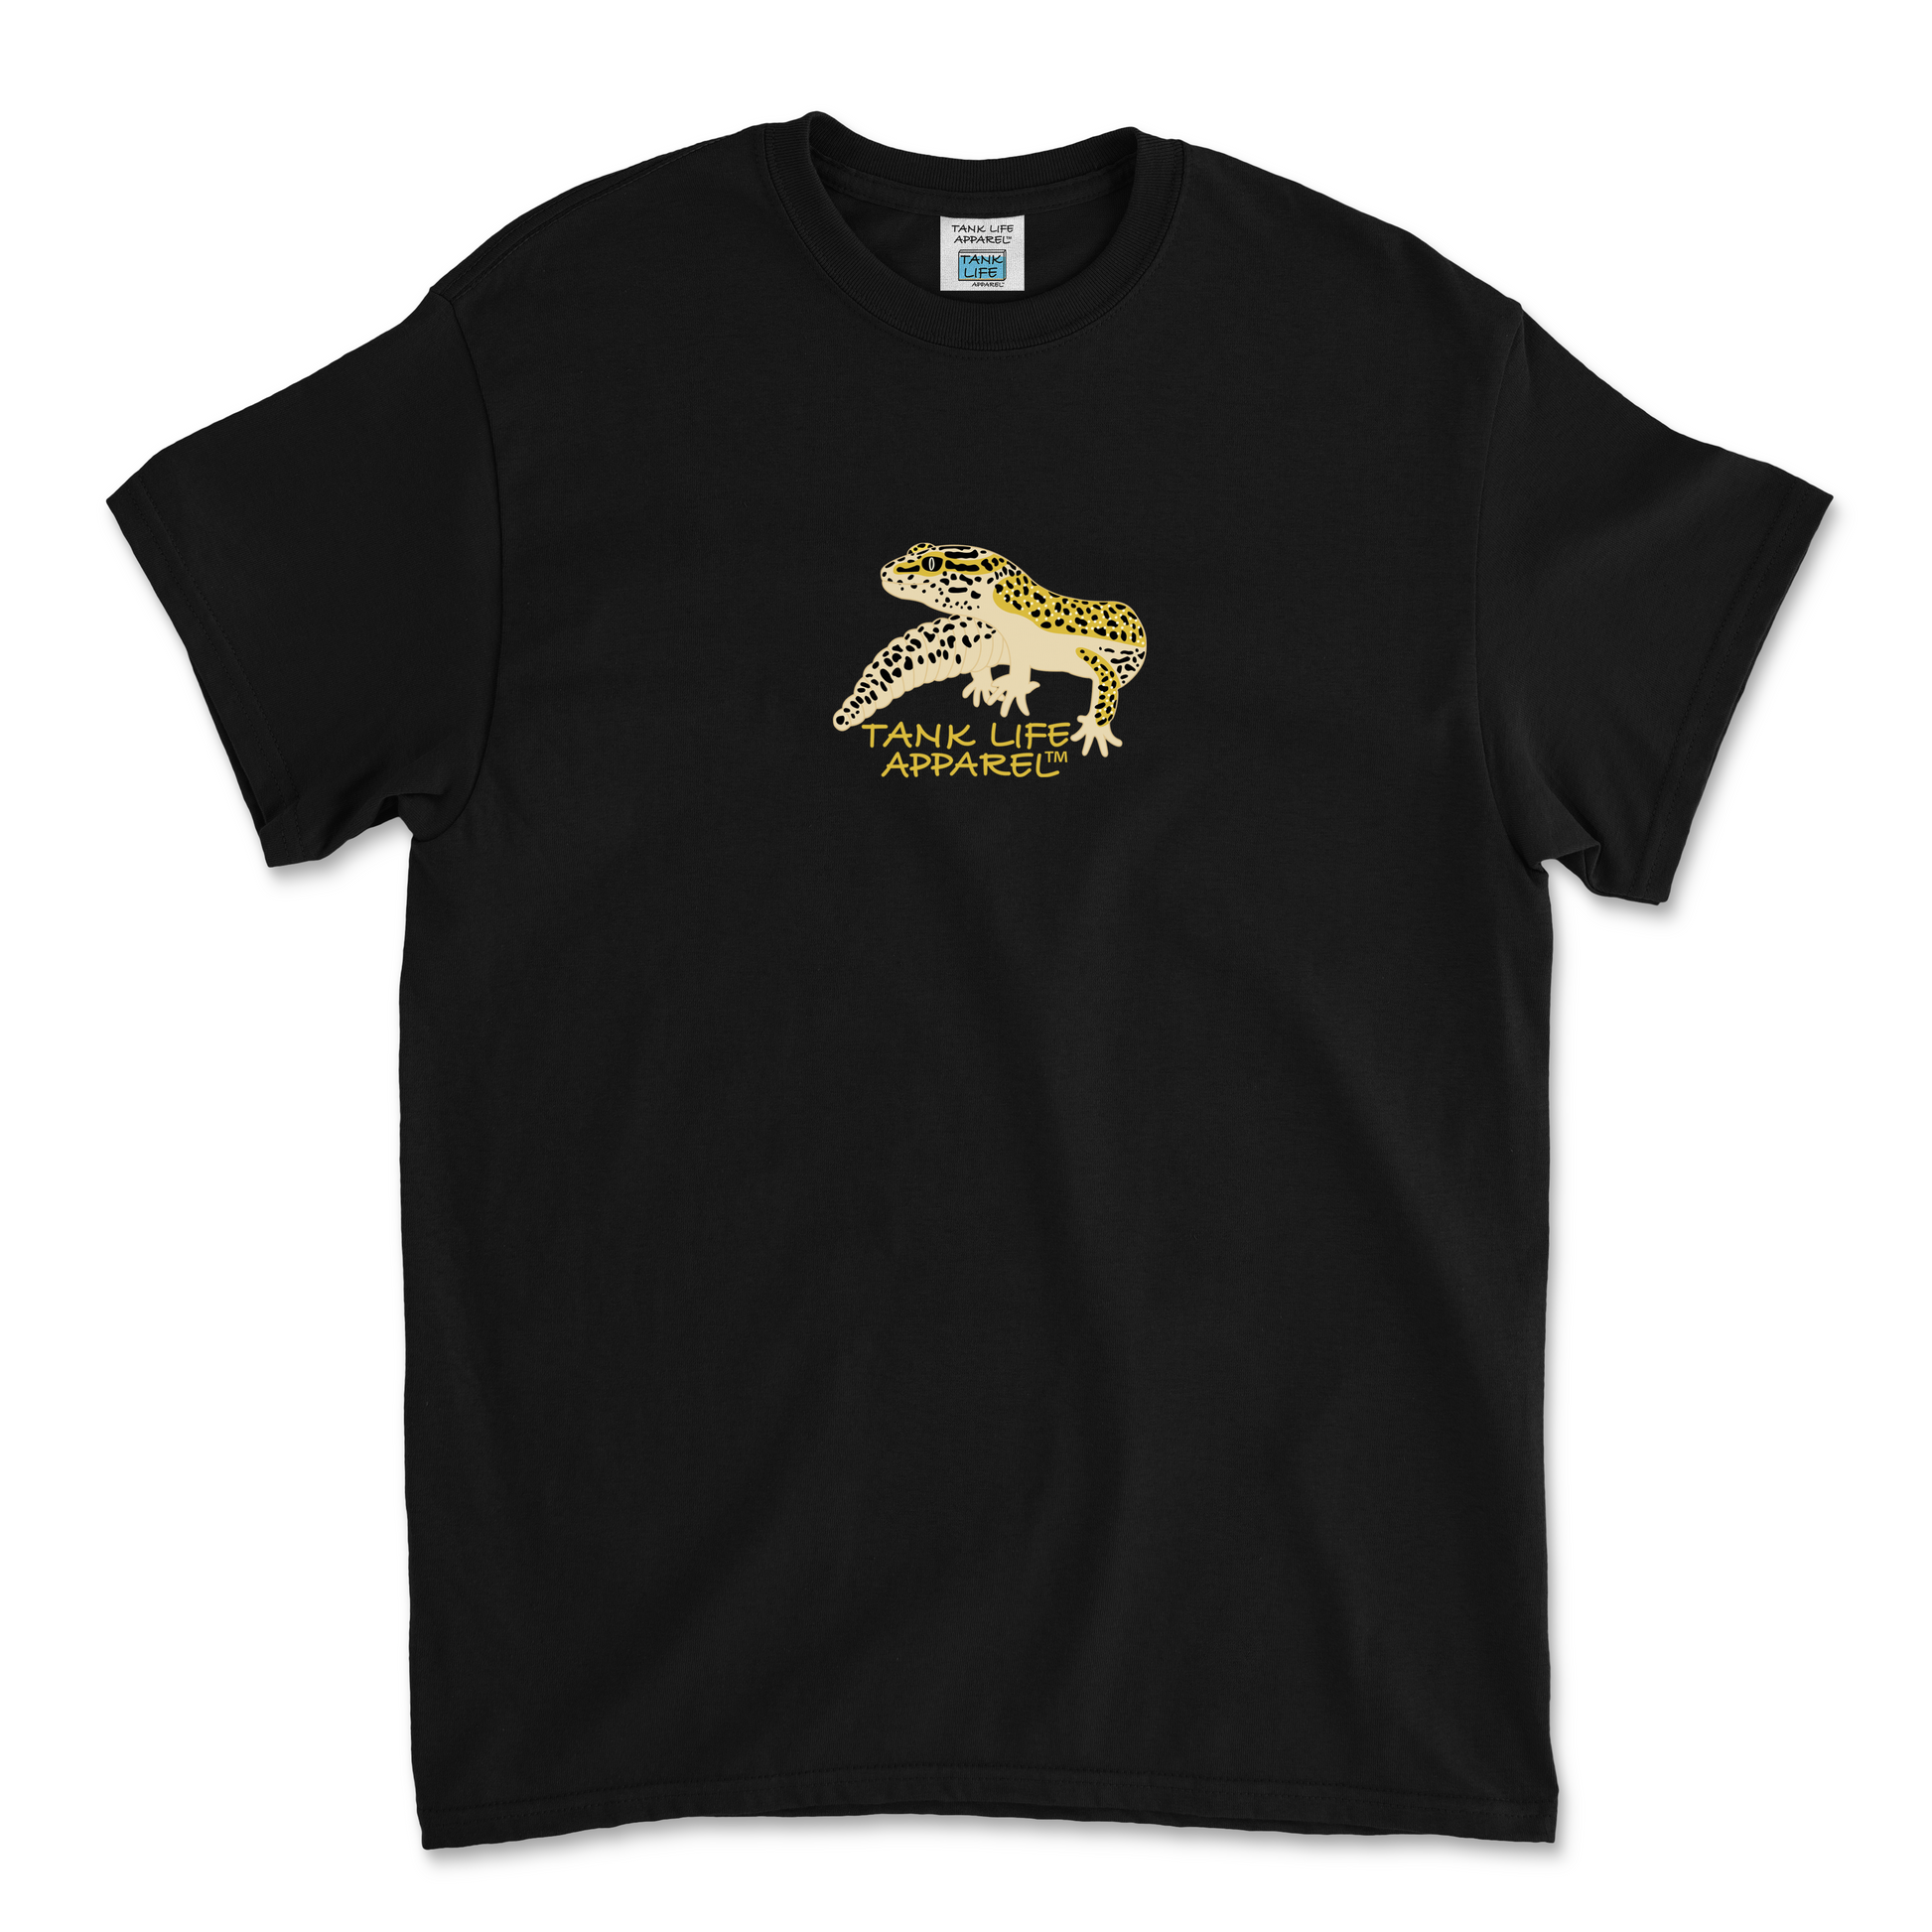 The Tank Life Apparel leopard gecko design on a youth tee in black or white. Pet Yellow lizard gecko leo with black dots.